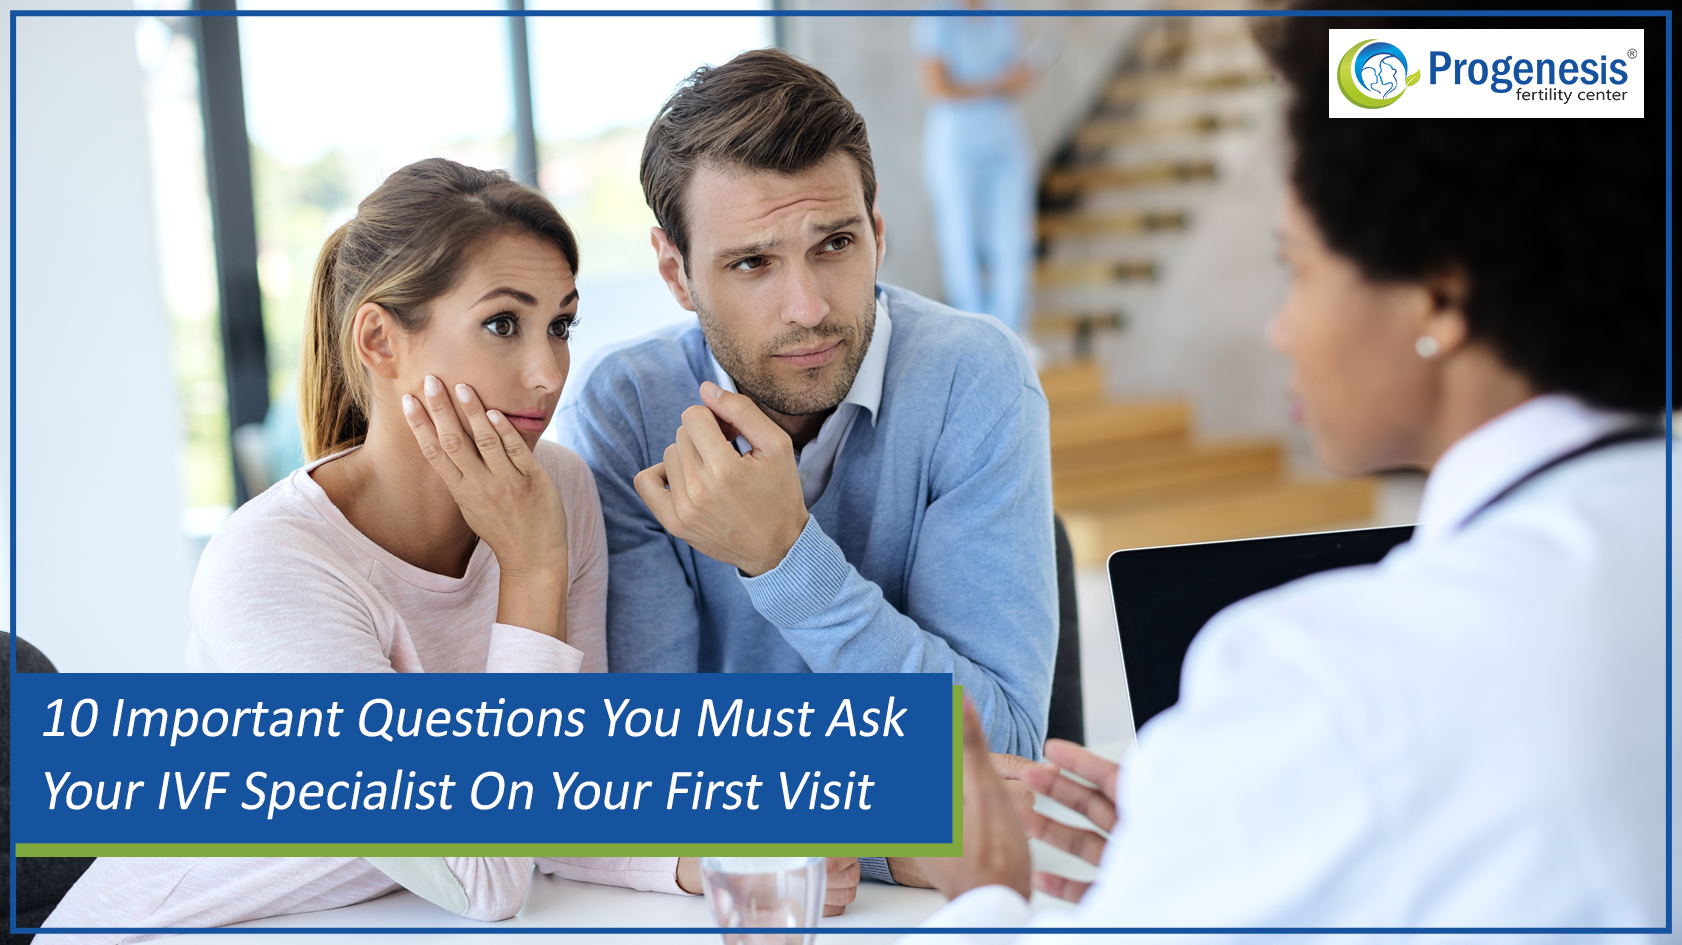 Questions You Must Ask Your IVF Specialist